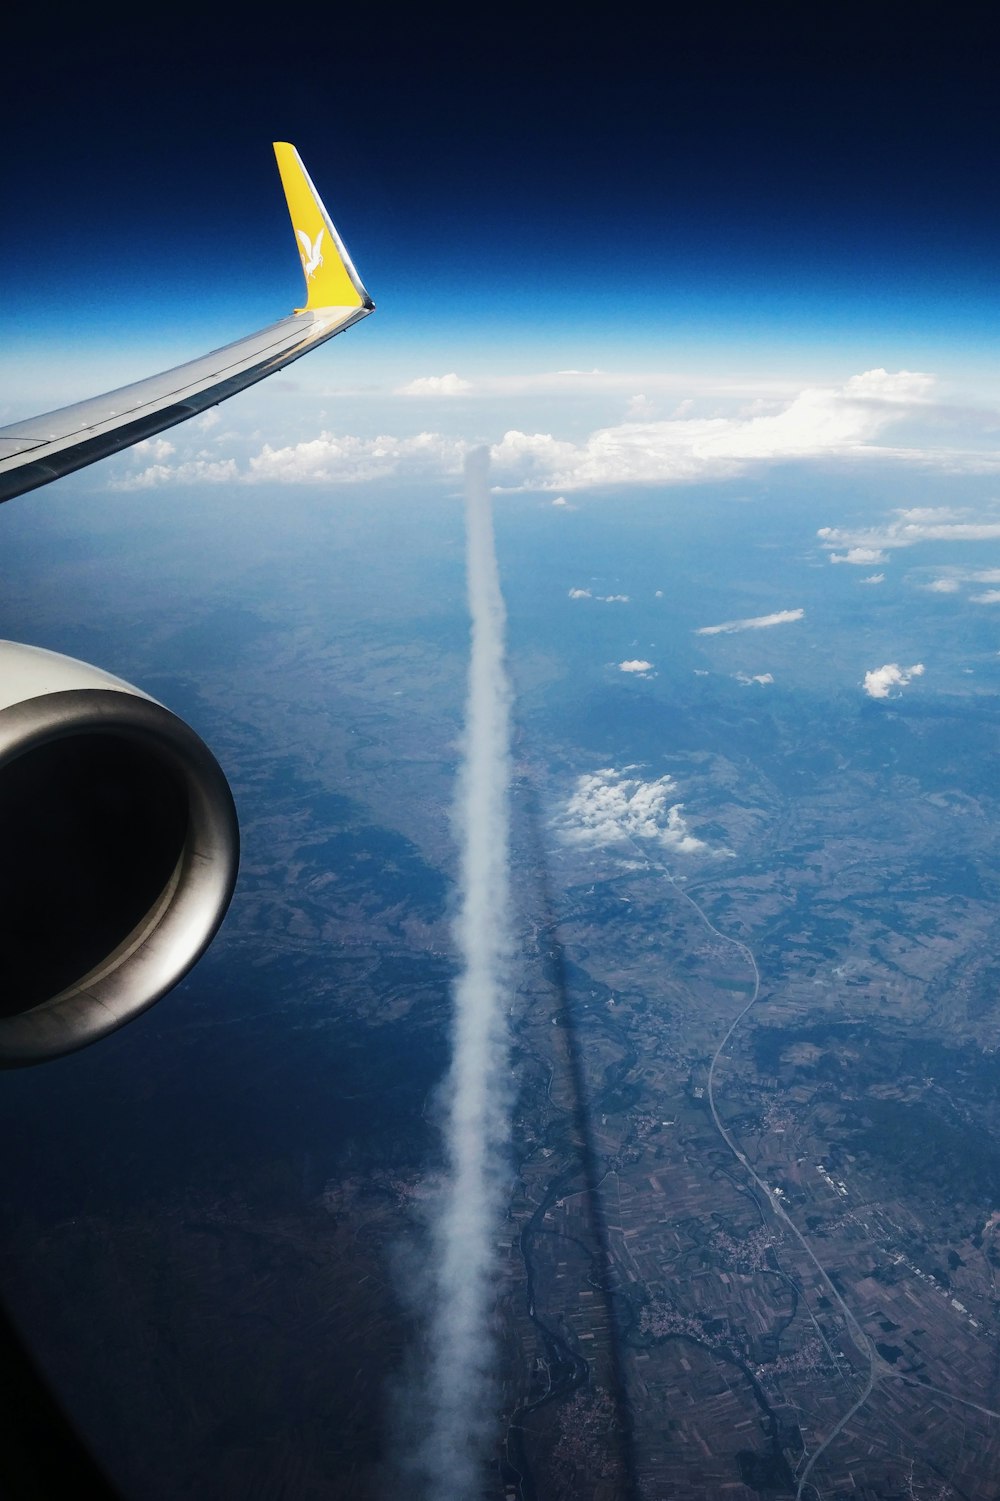 contrail streaming below flying aircraft